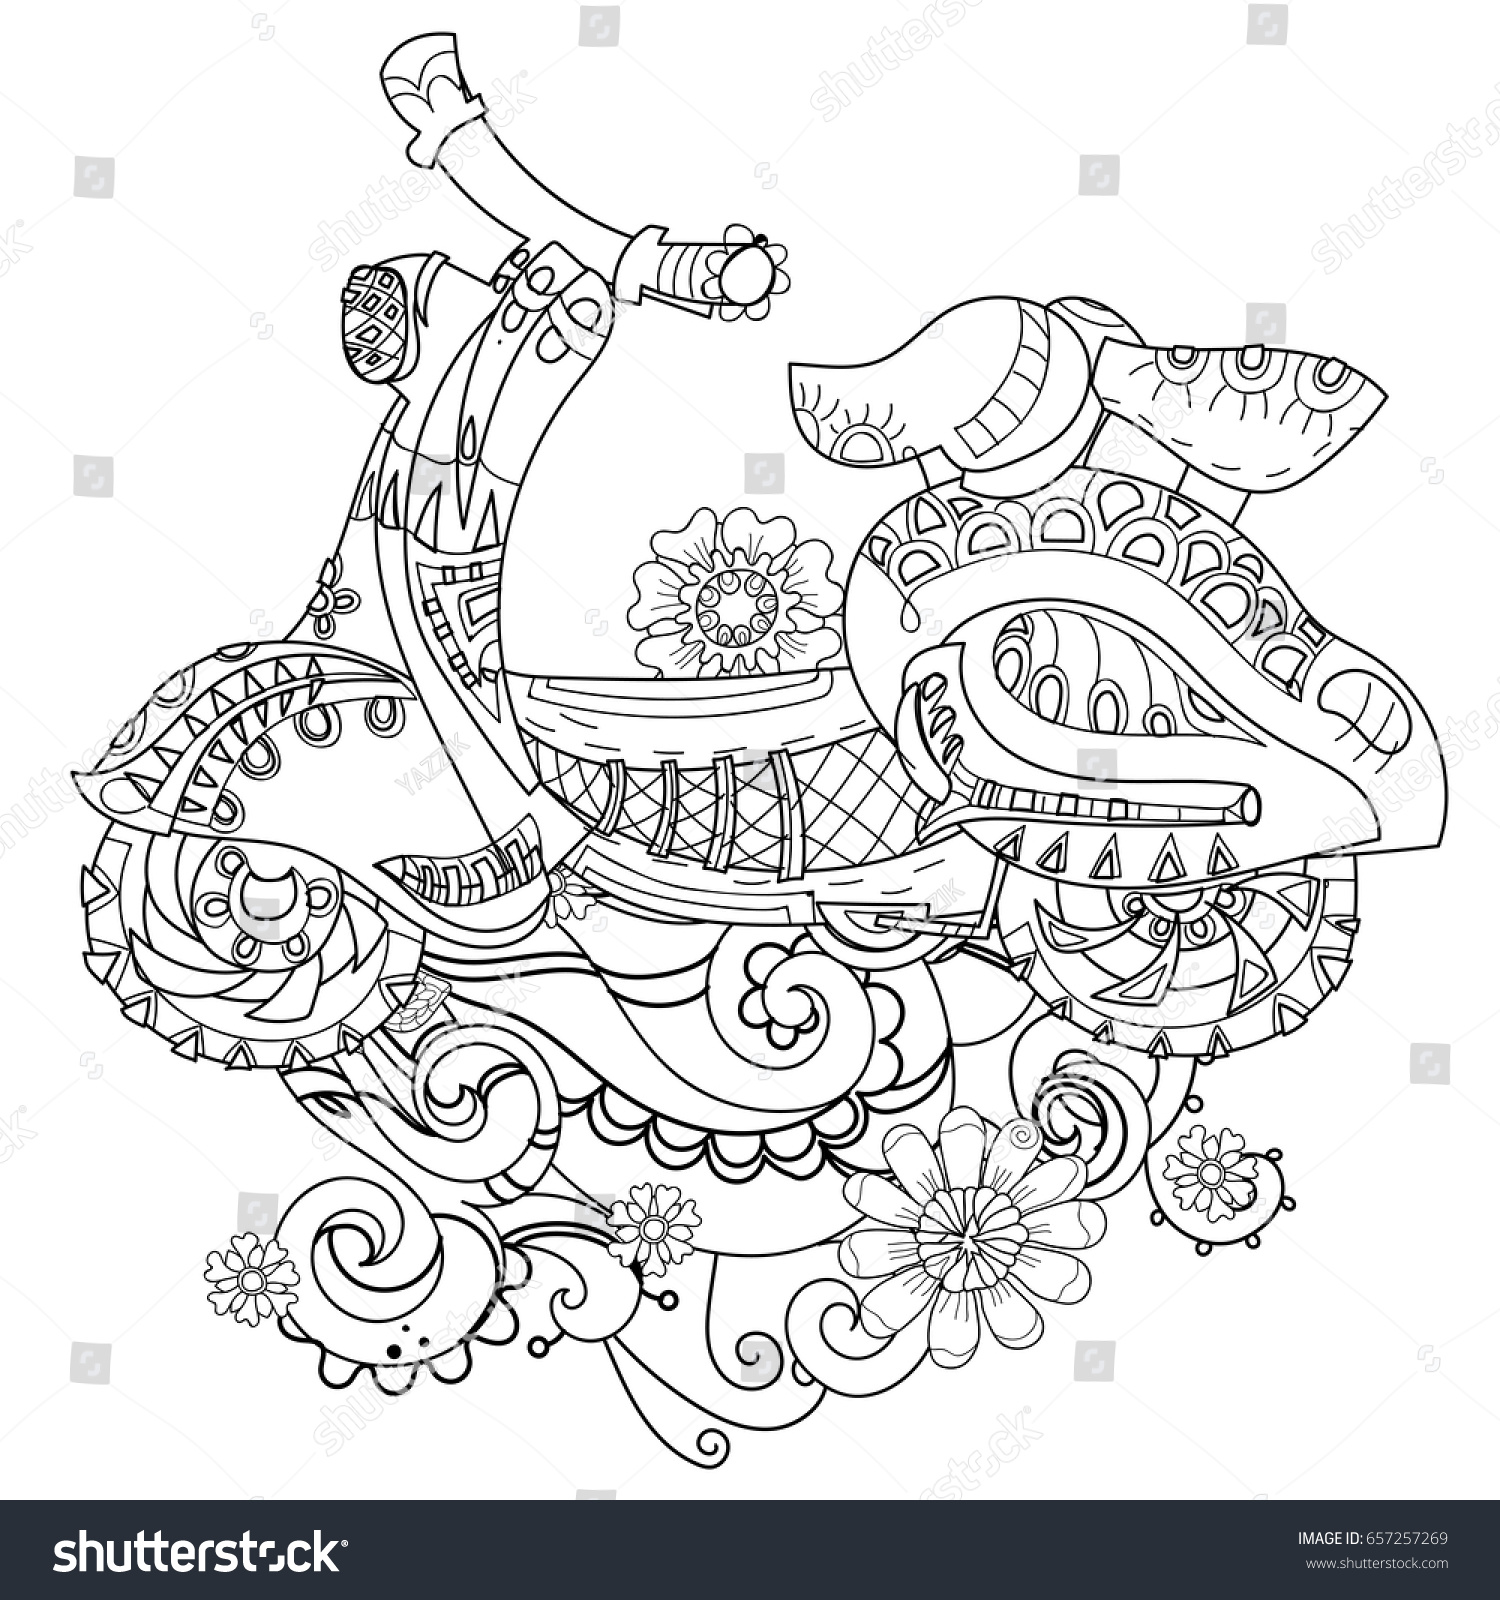 Motor Scooter Doodle Nice Sixties Style Hand Stock Vector Royalty